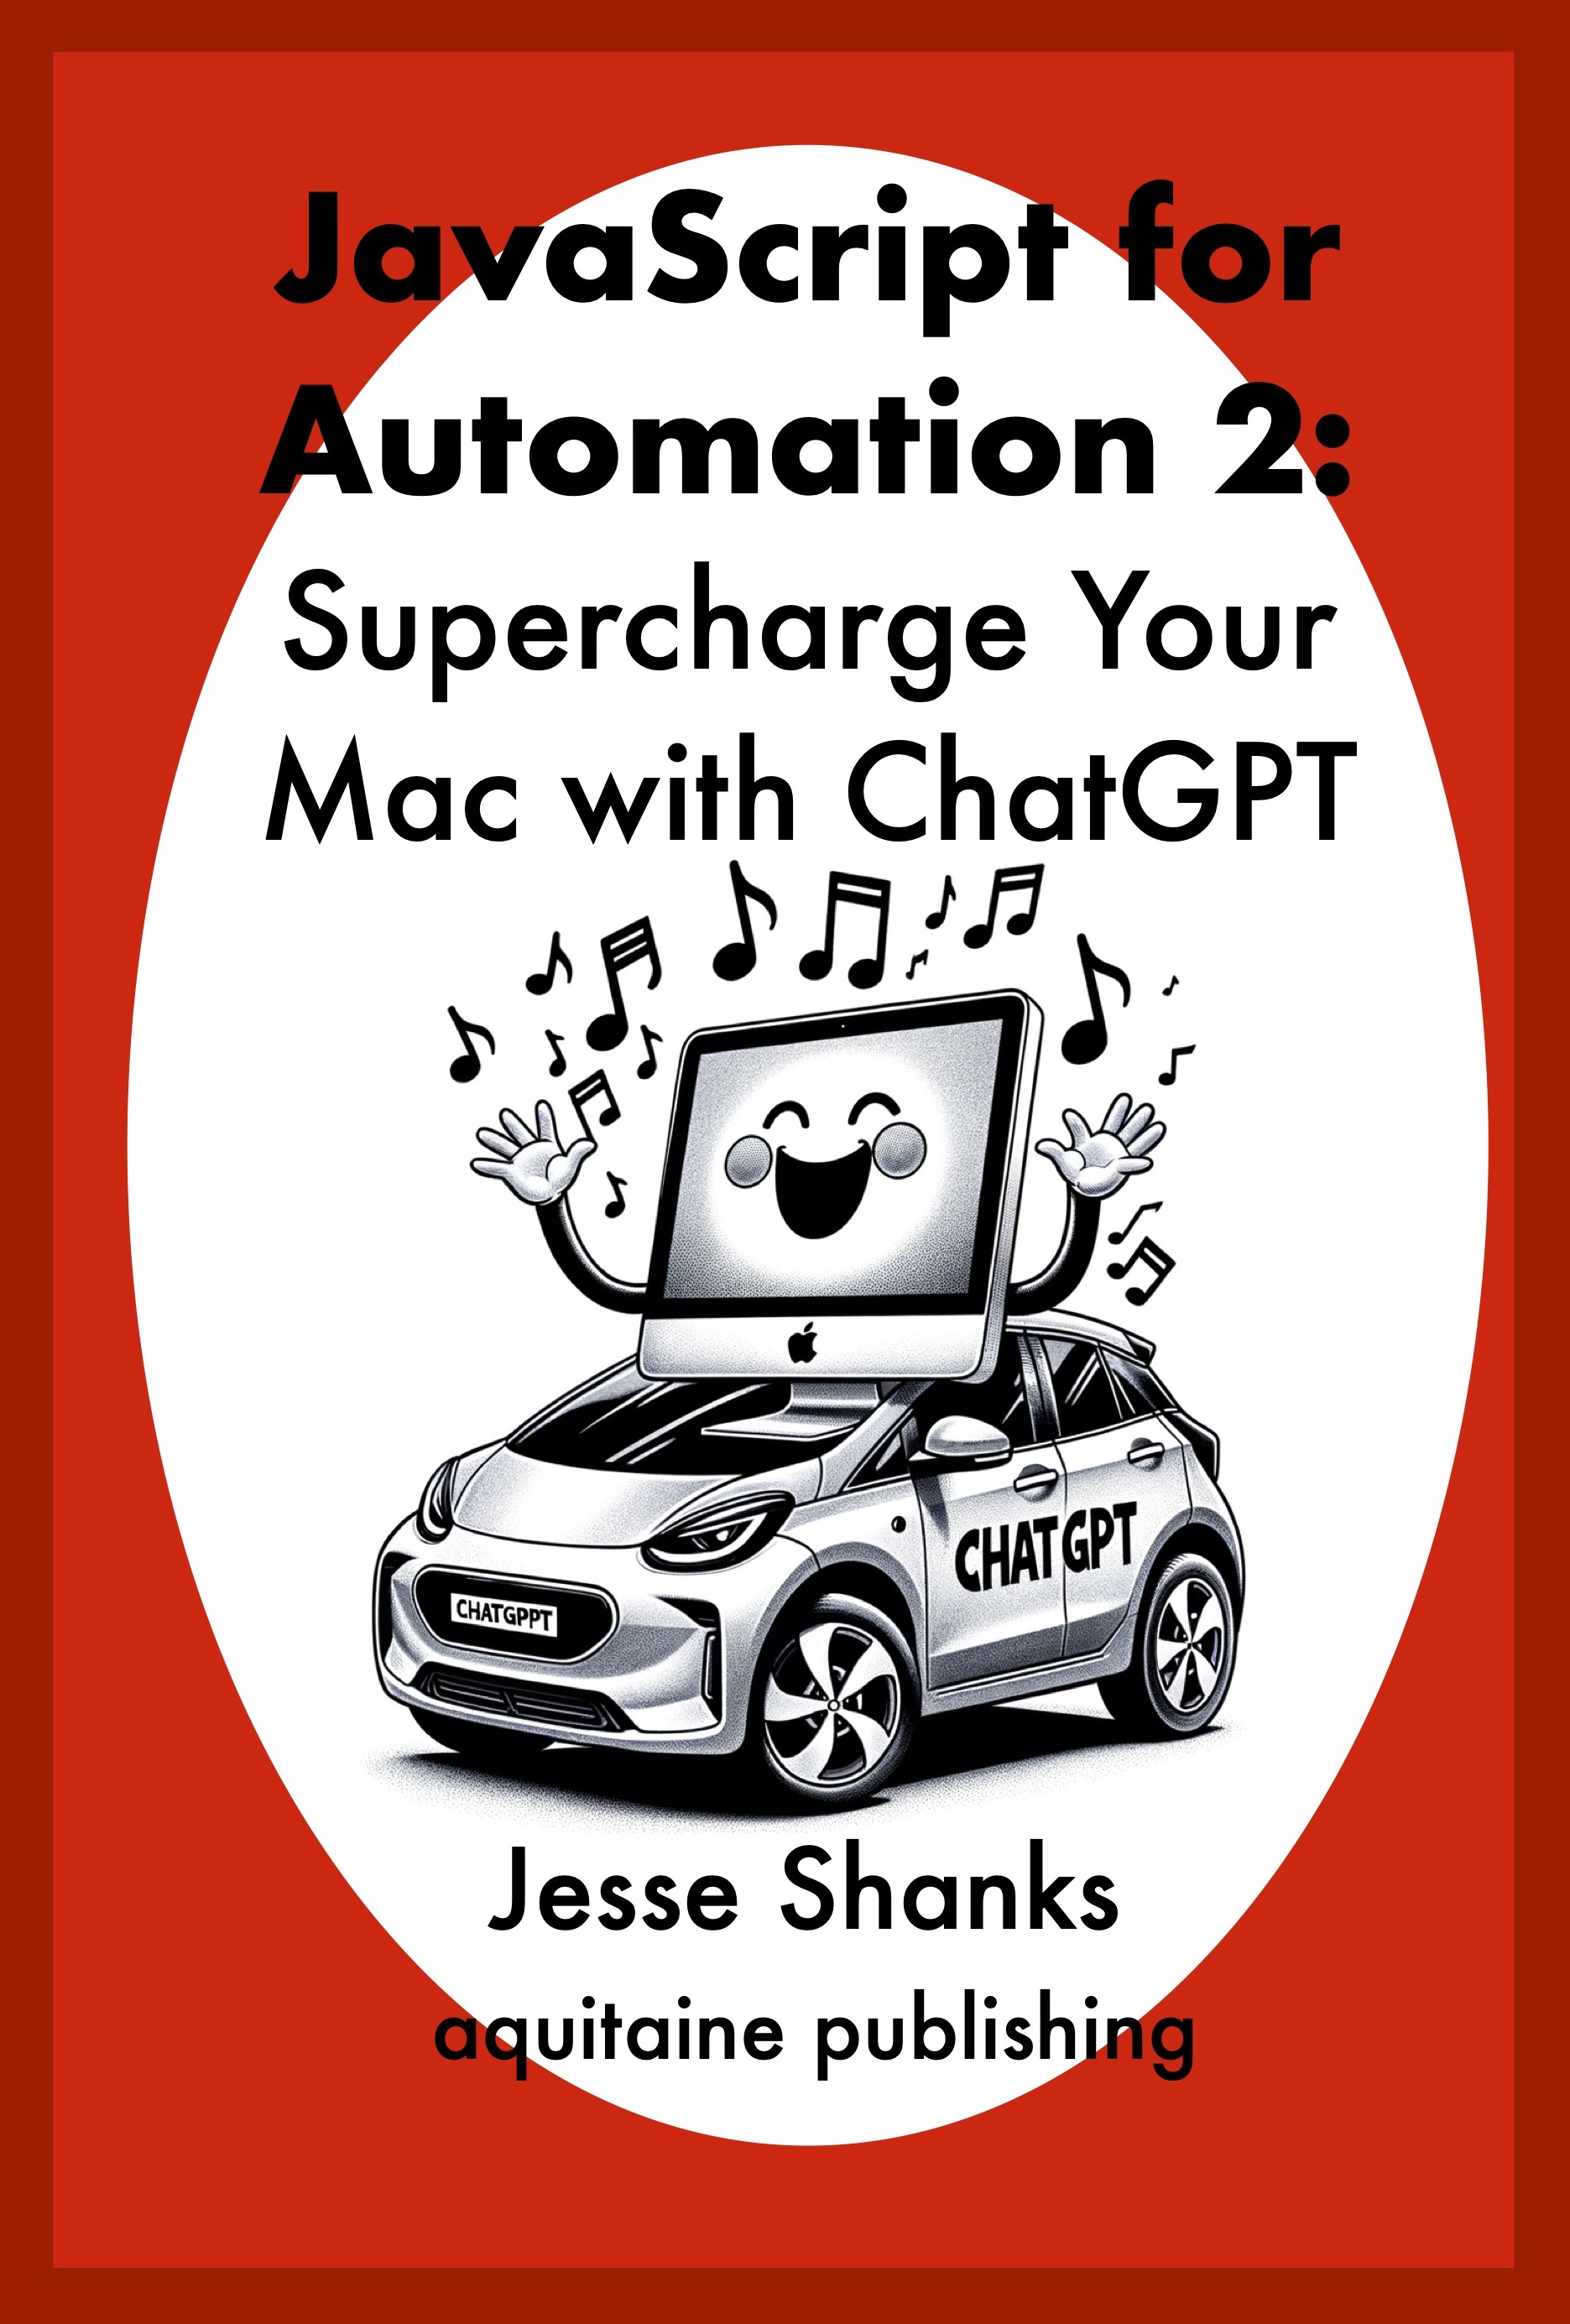 Javascript for Automation 2: Supercharge Your Mac with ChatGPT